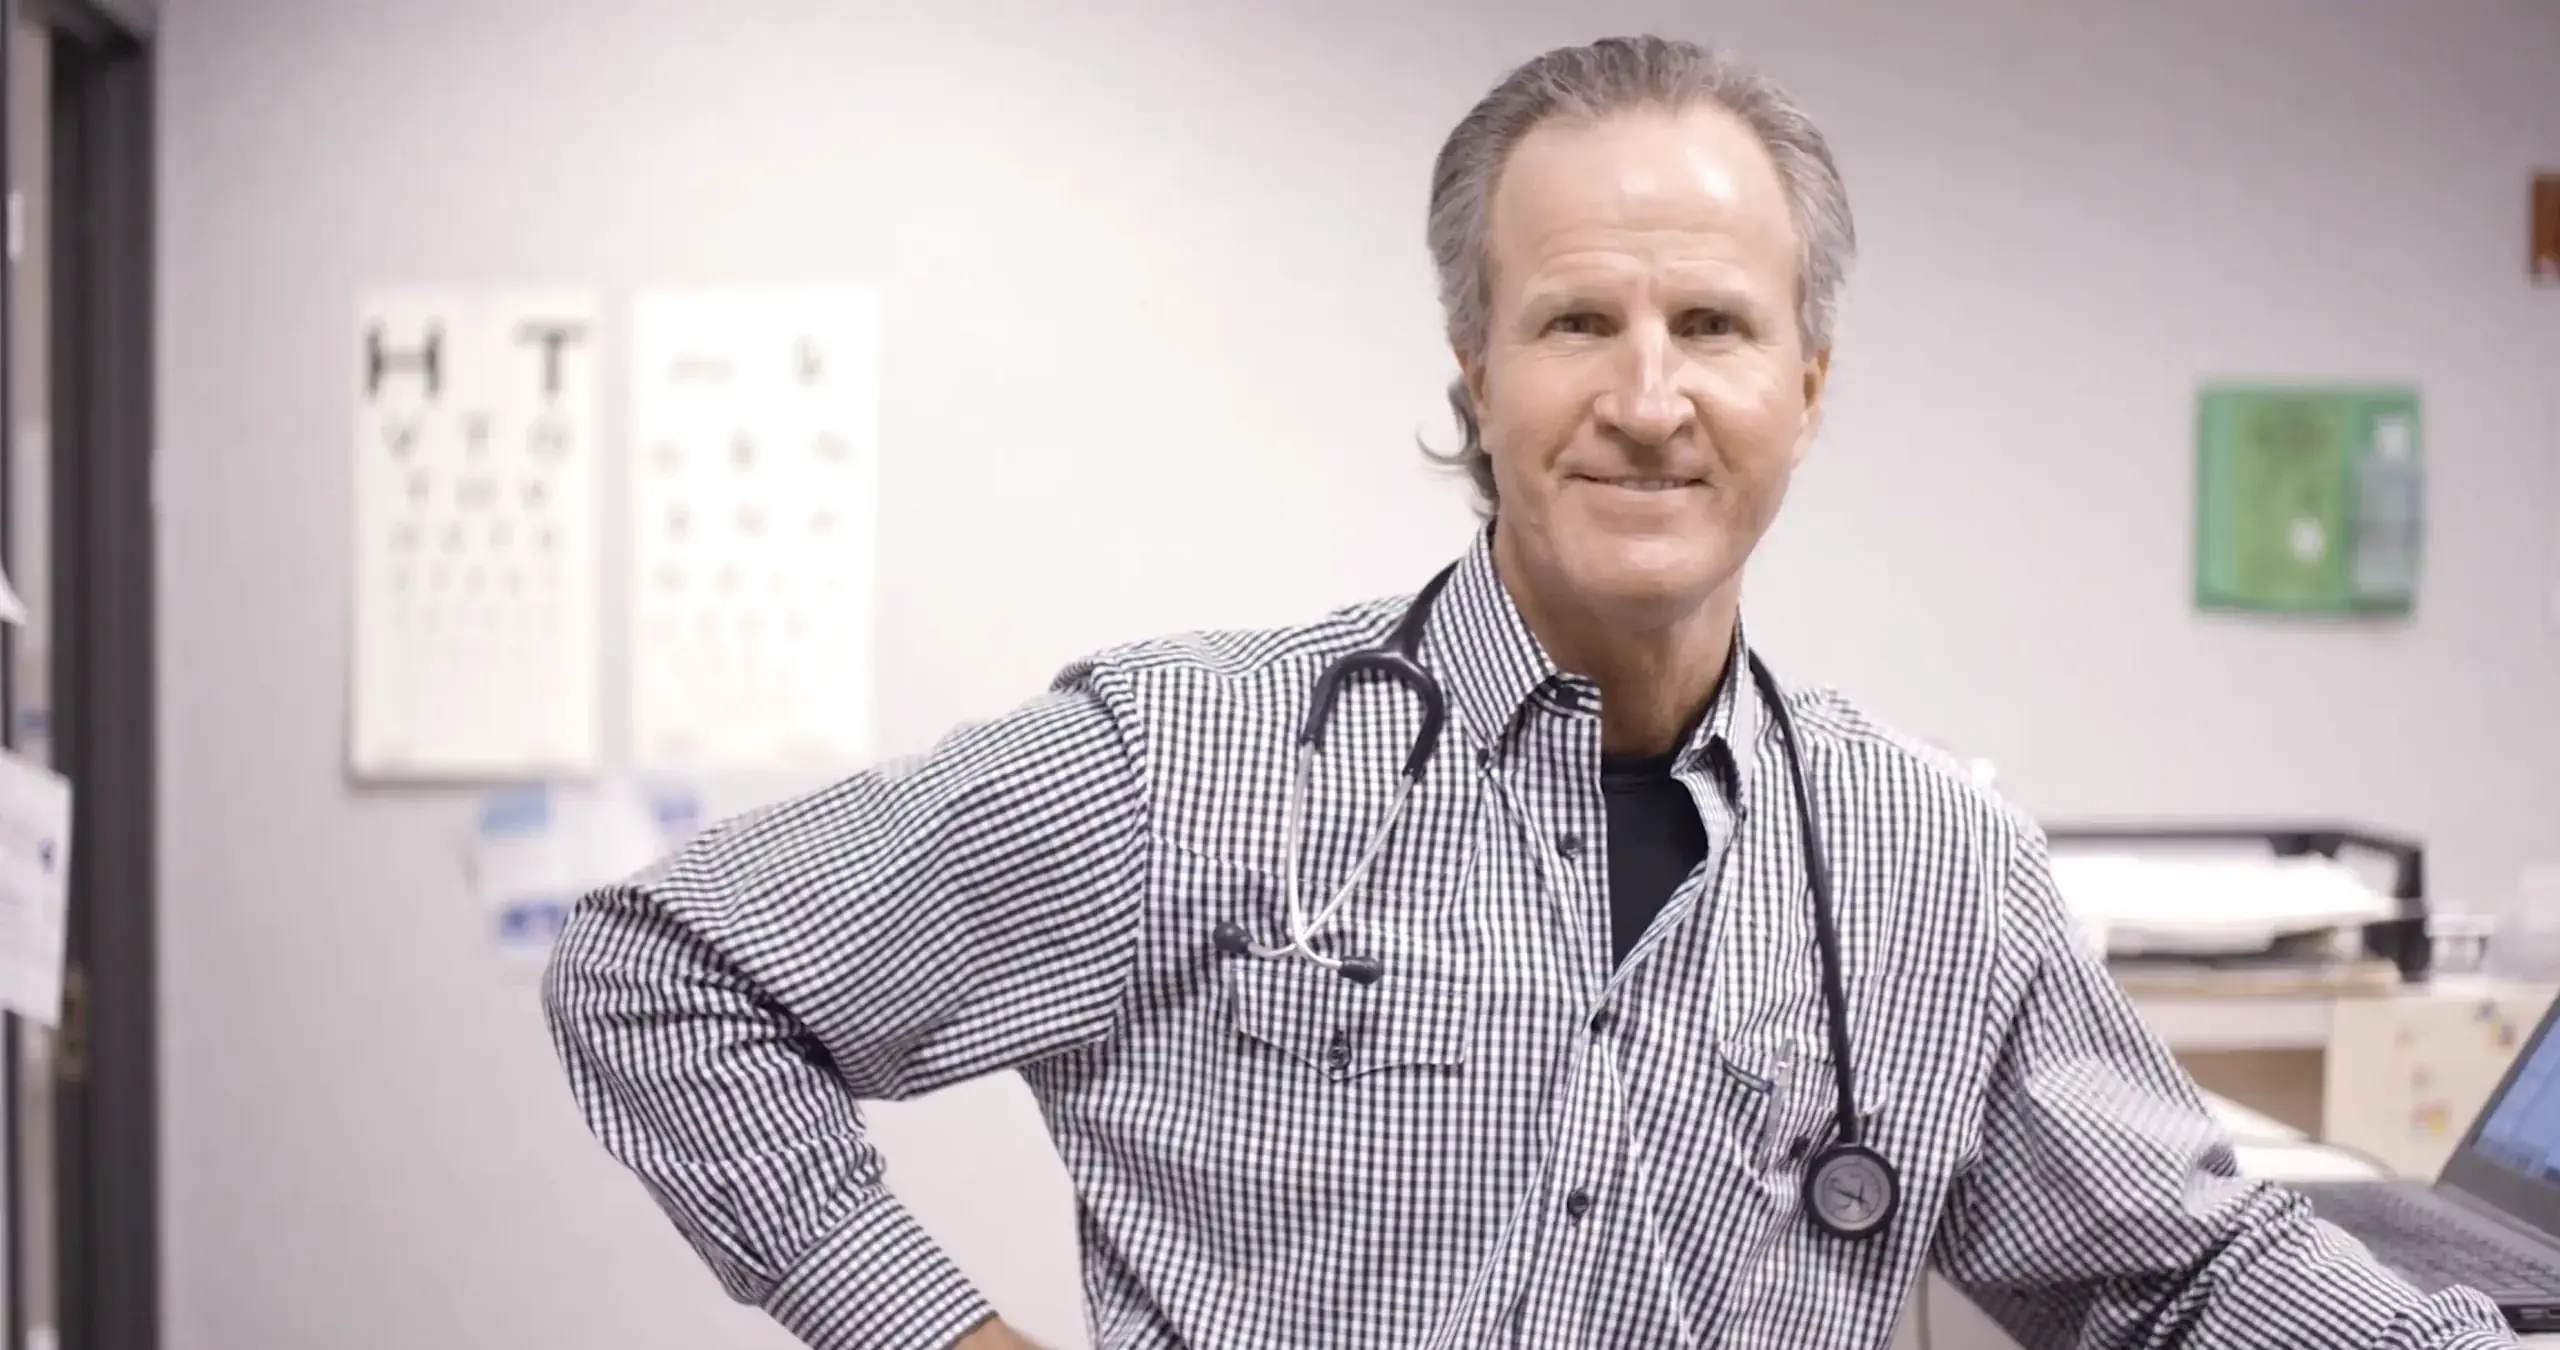 Health care worker wearing a gingham button-down and stethoscope smiles for the crew members of a Dallas healthcare video production company.